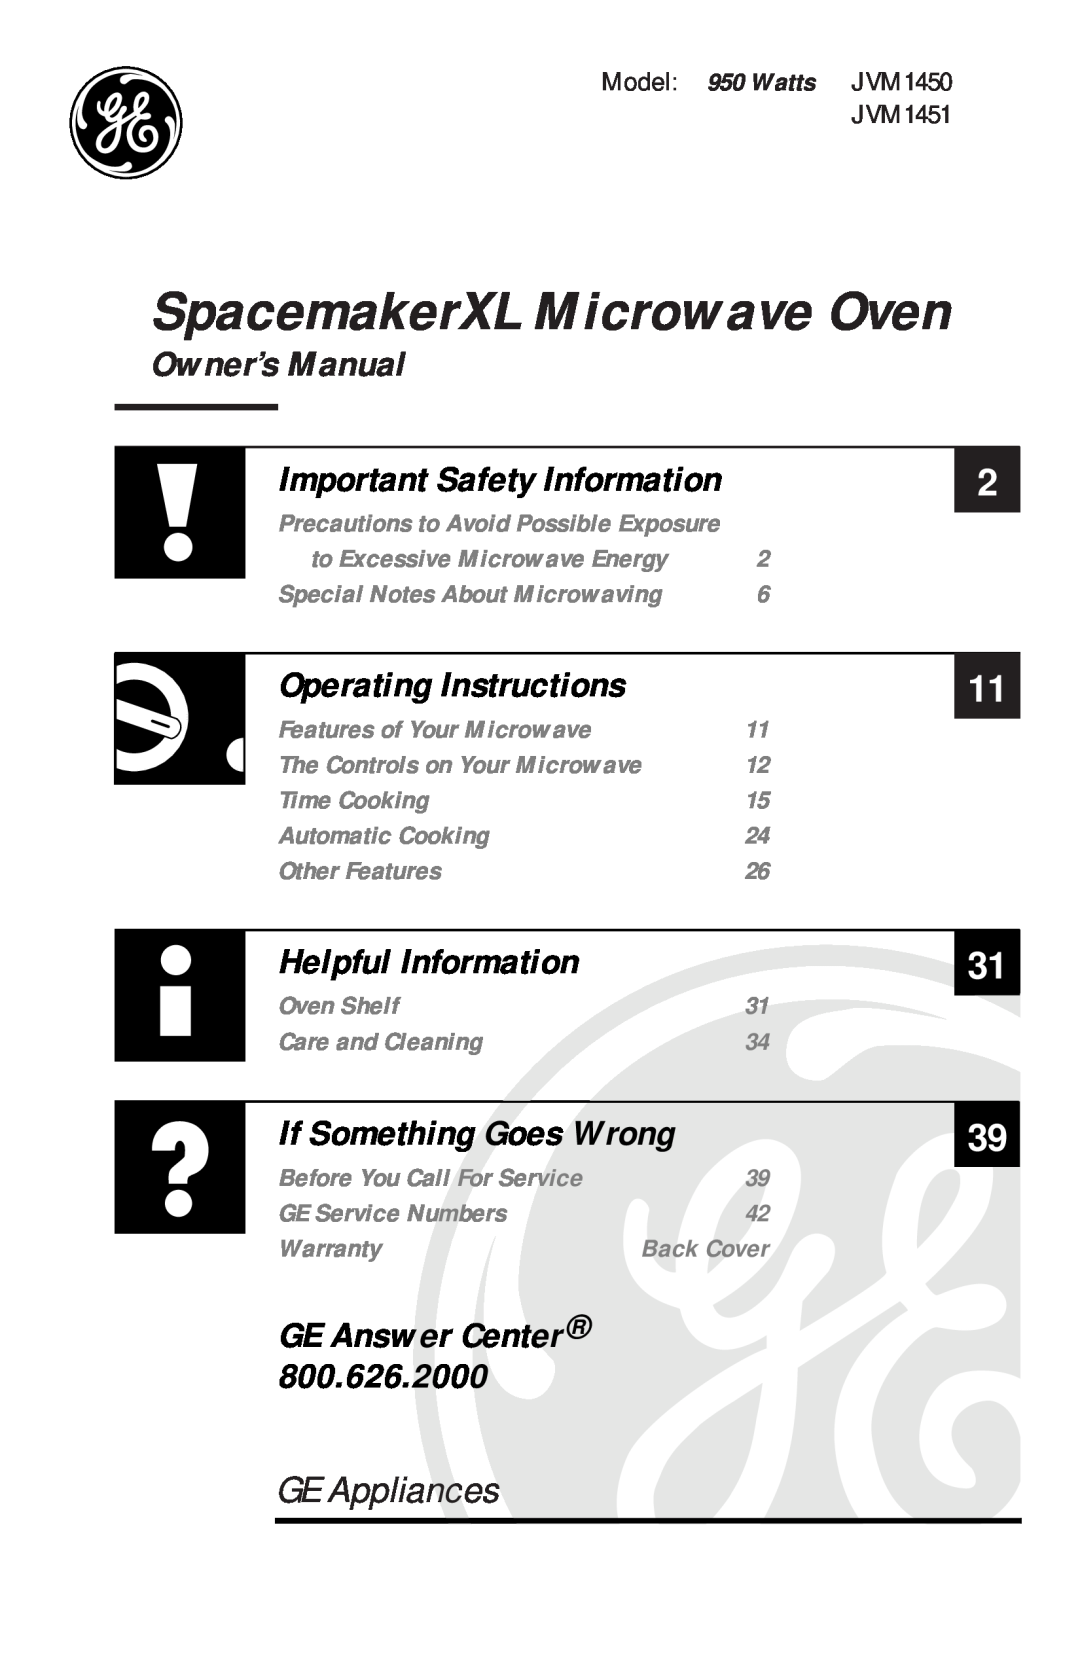 GE JVM1451, JVM1450 owner manual SpacemakerXL Microwave Oven, GE Appliances, Operating Instructions, Helpful Information 